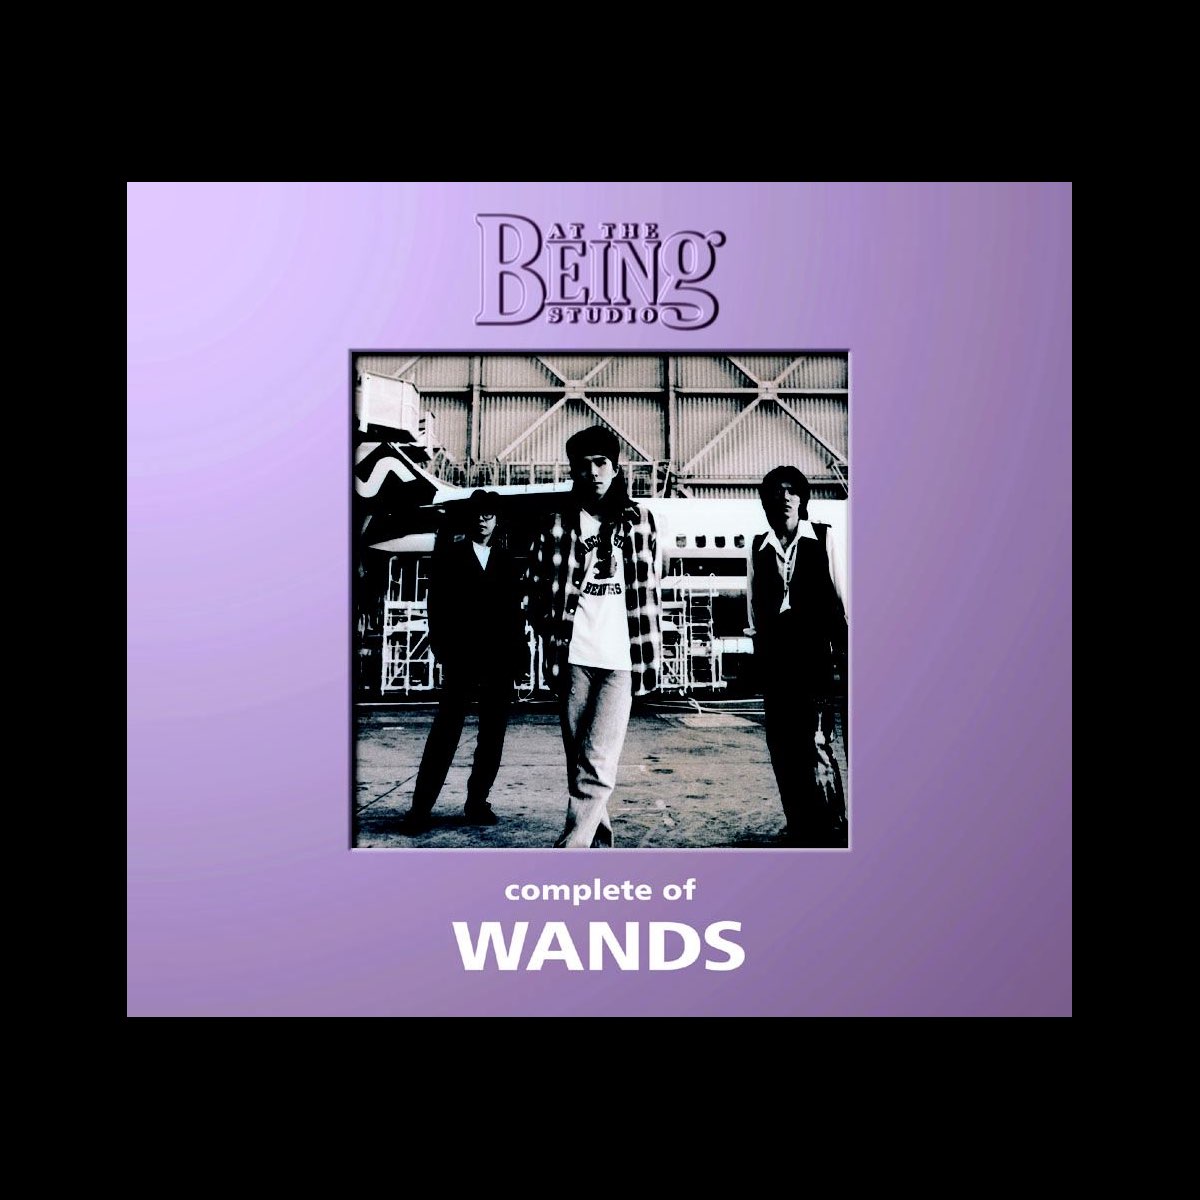 Complete of WANDS: At the Being Studio - WANDSのアルバム - Apple Music